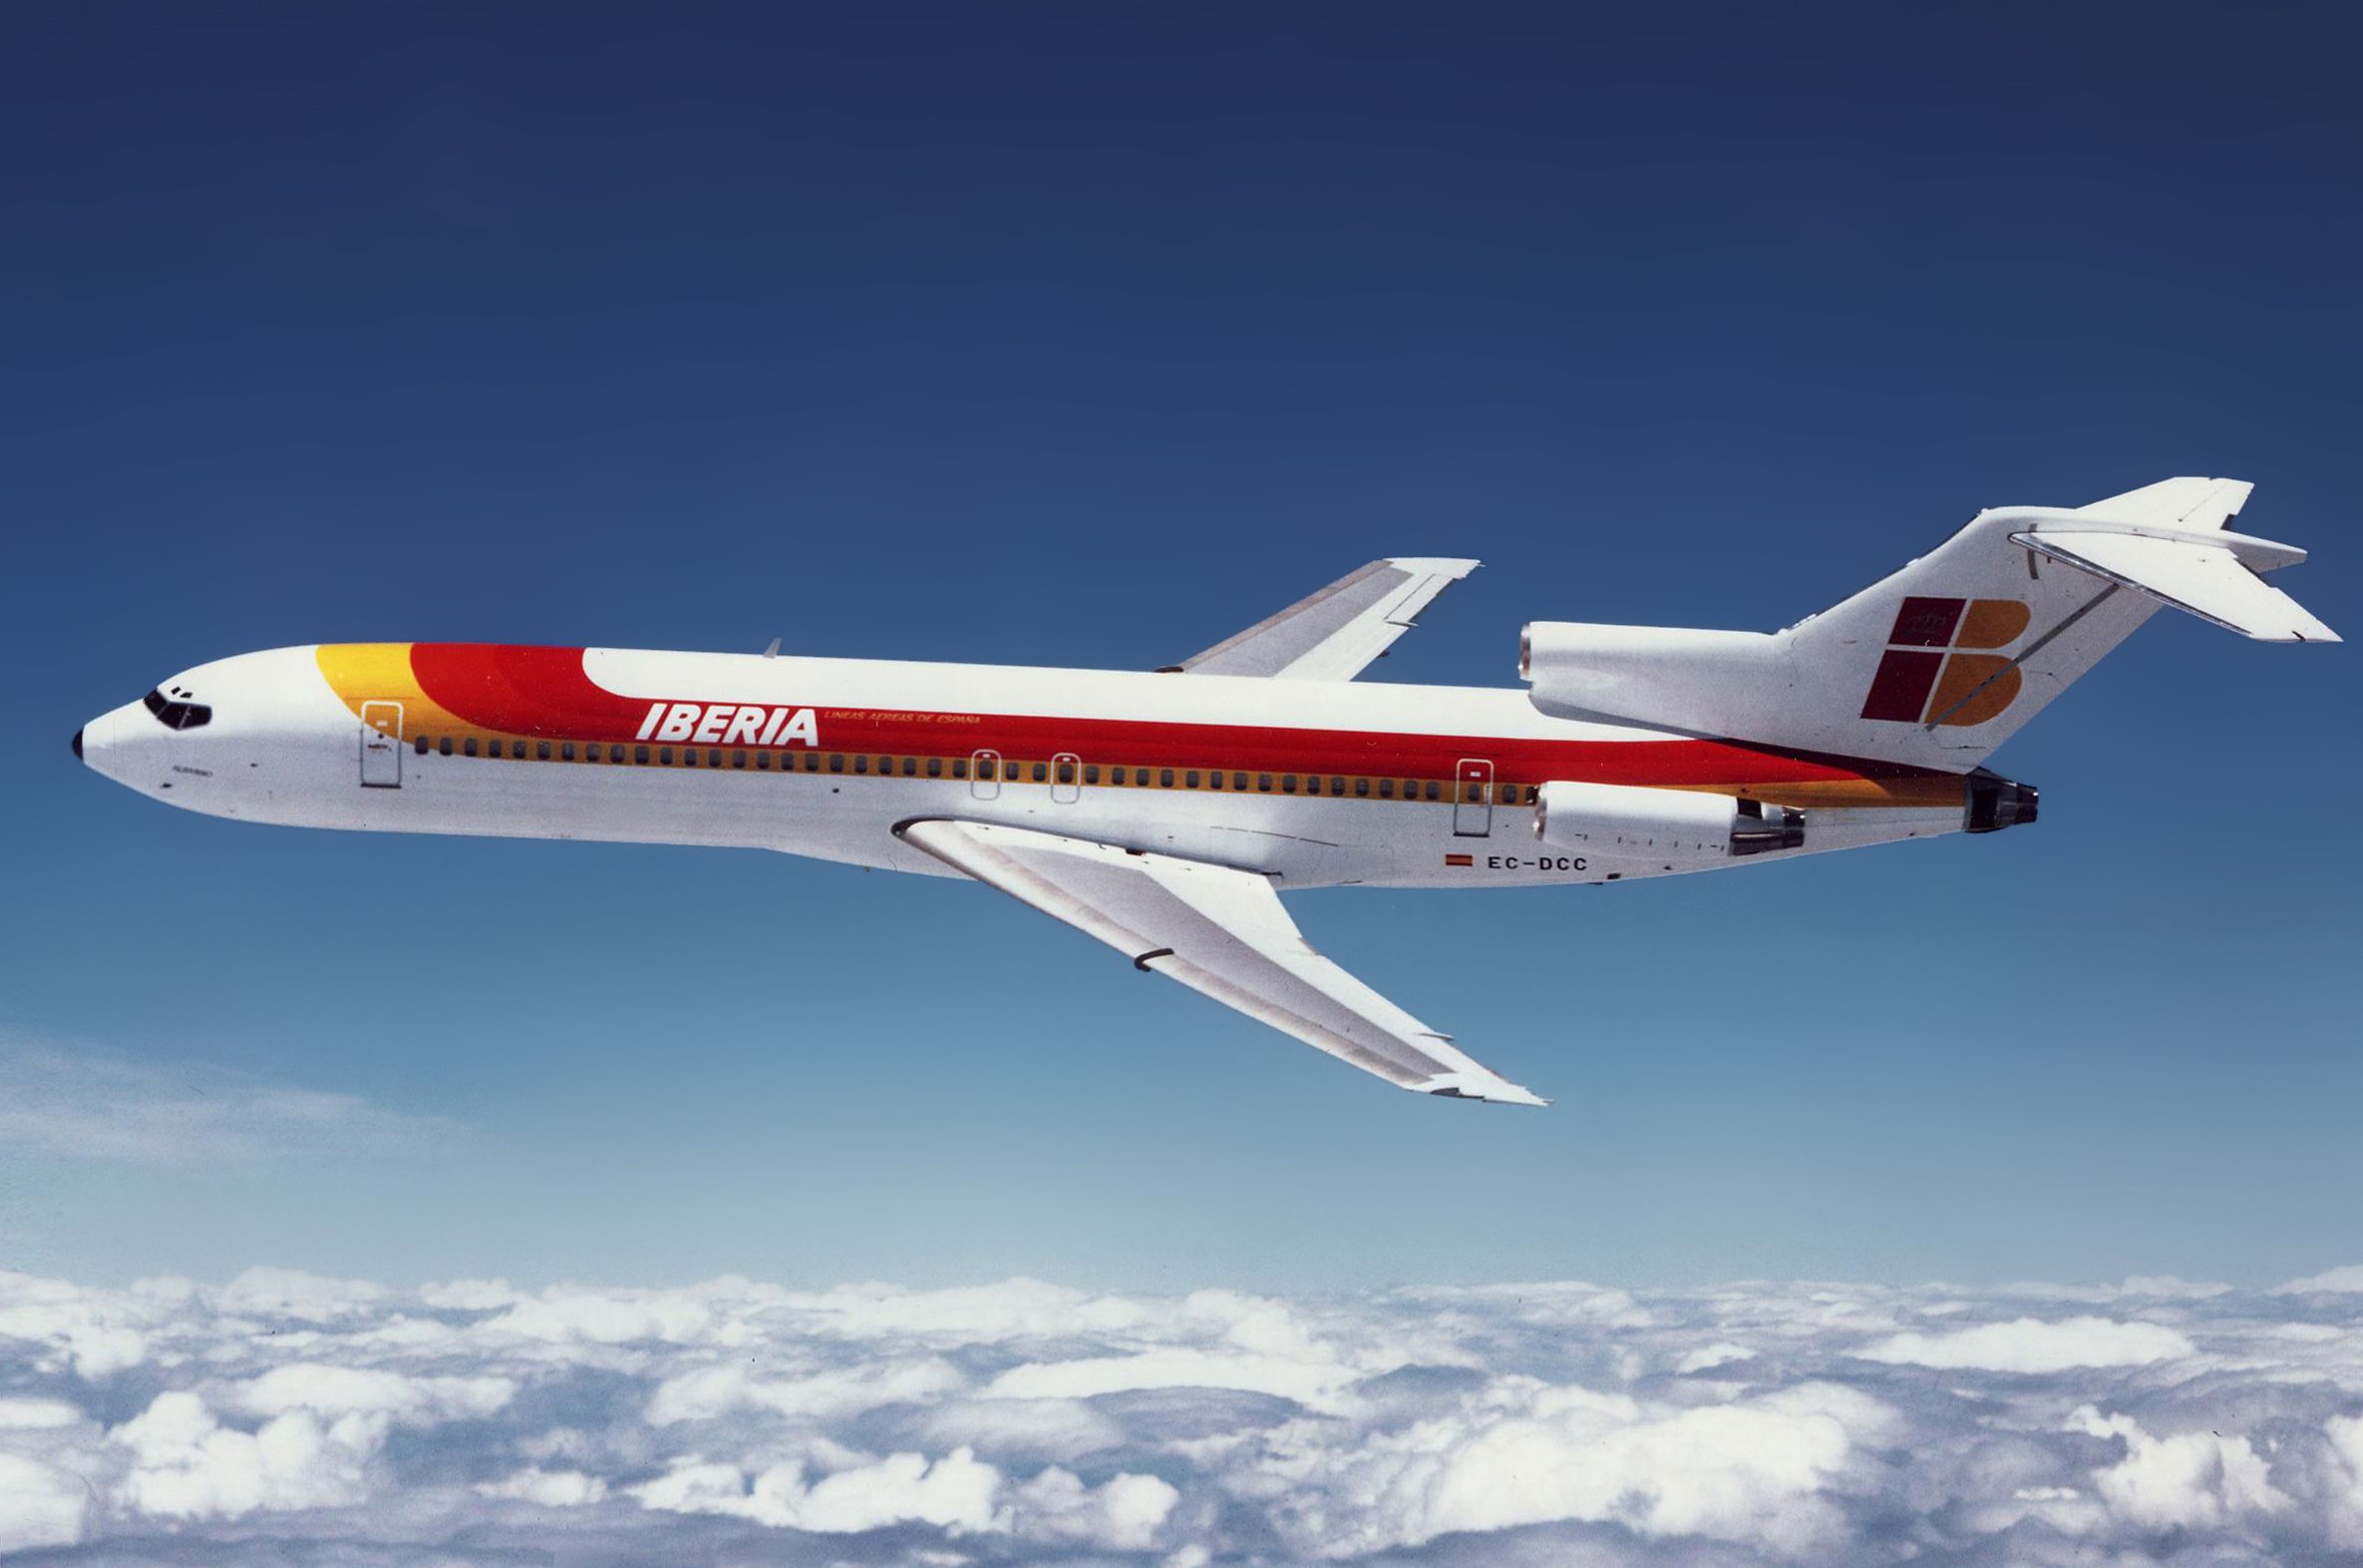 An Iberia Boeing 727 Flying above the clouds.